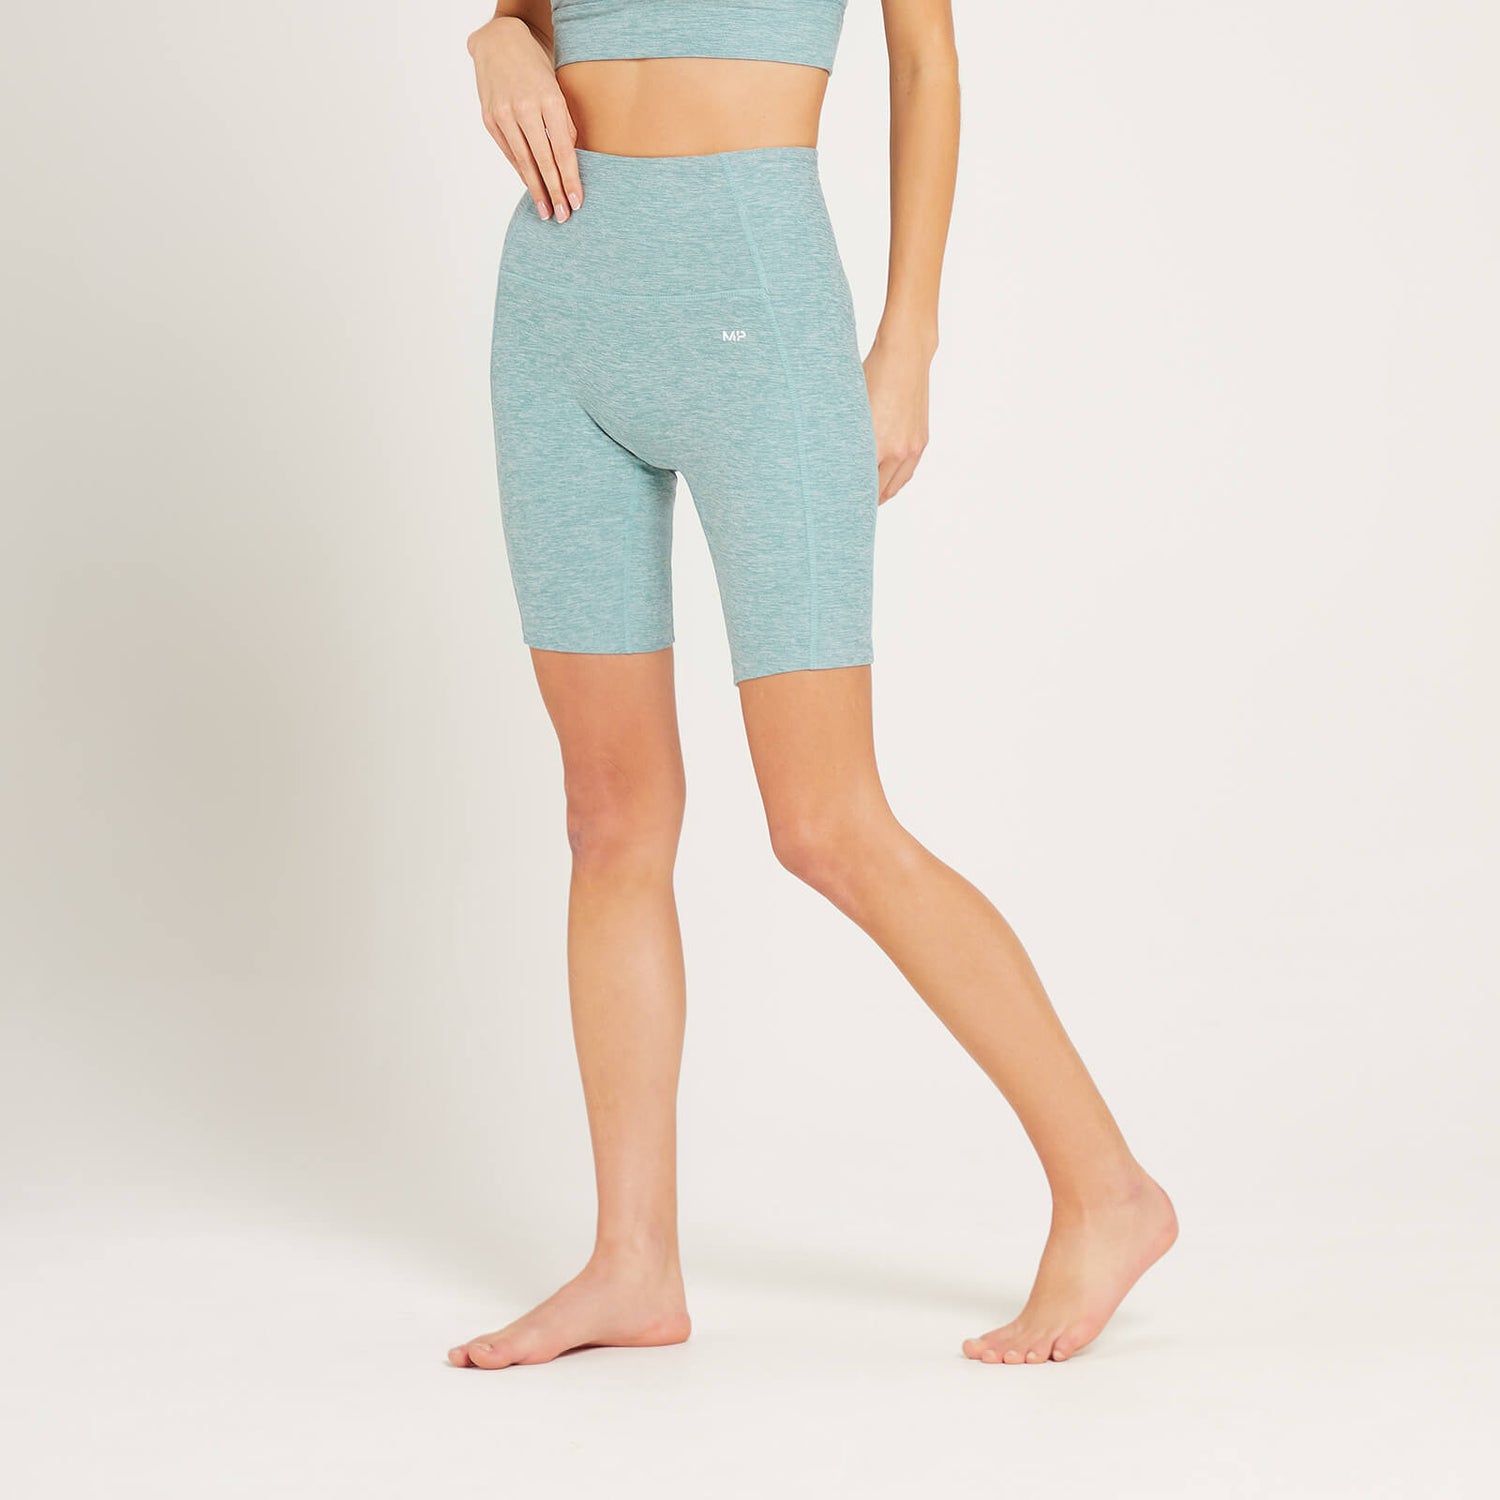 MP Women's Composure Cycling Shorts - Ice Blue Marl - S